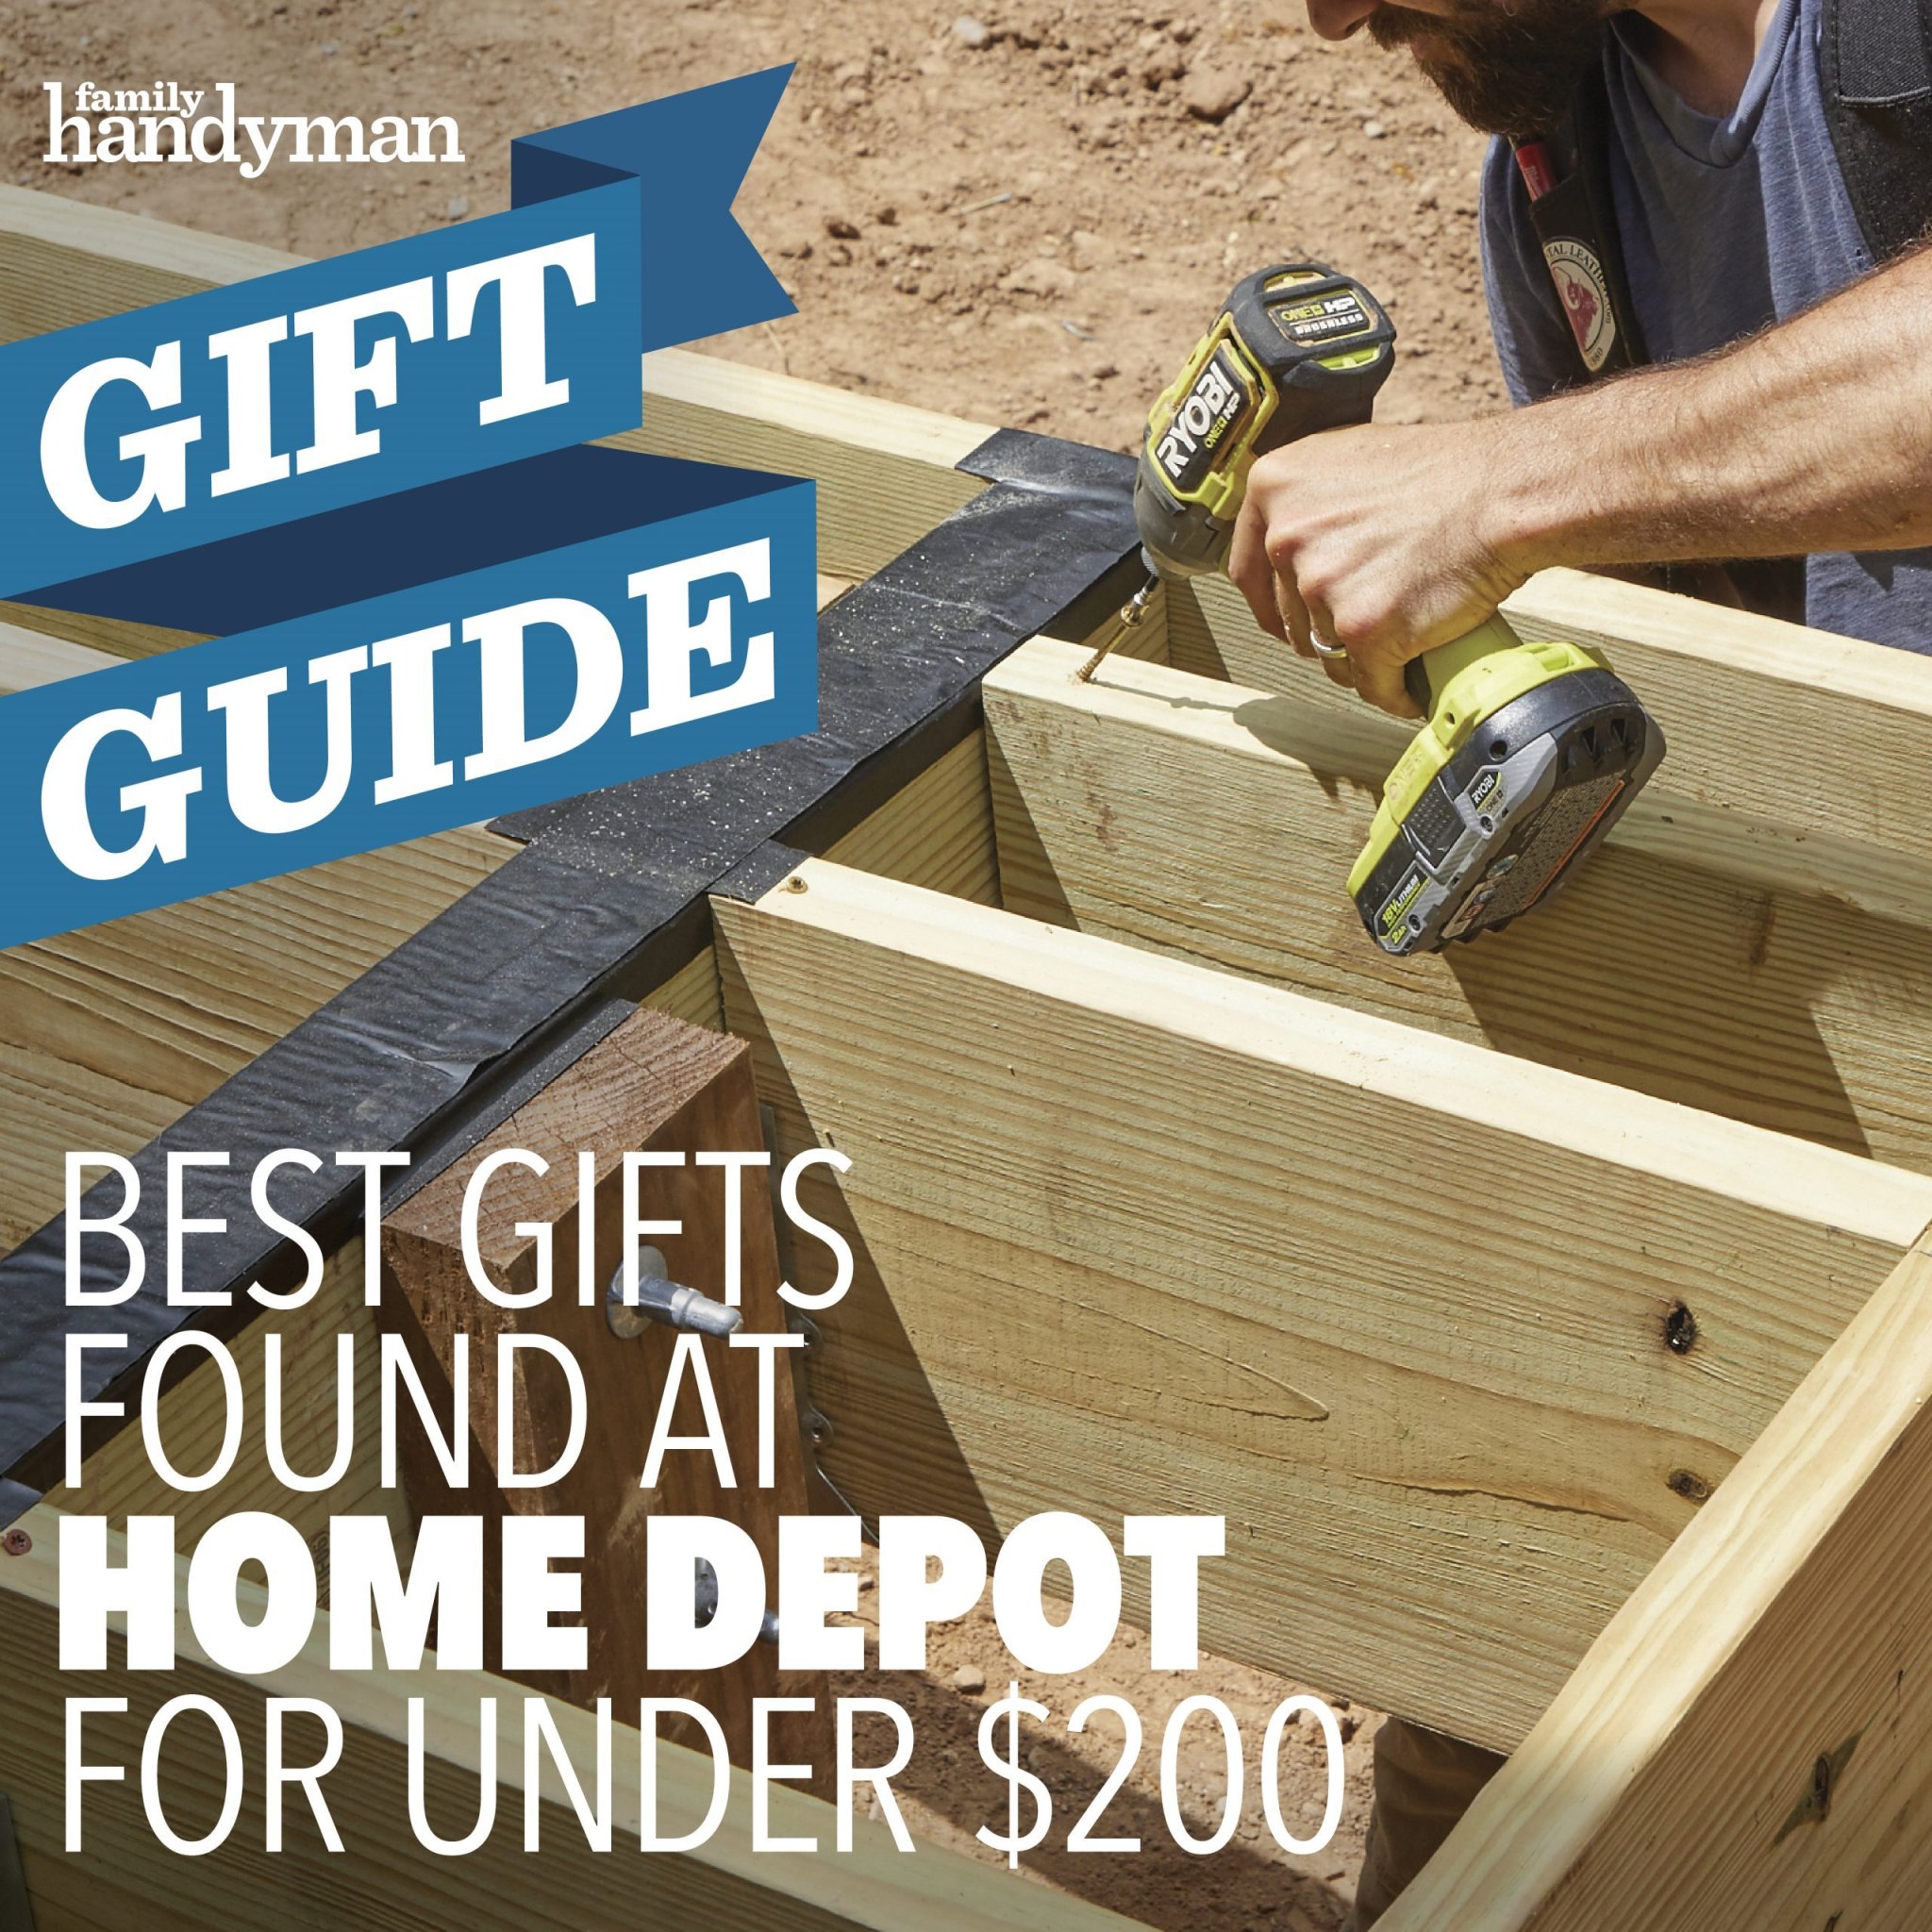 The Best Gifts Found At Home Depot for Under $200